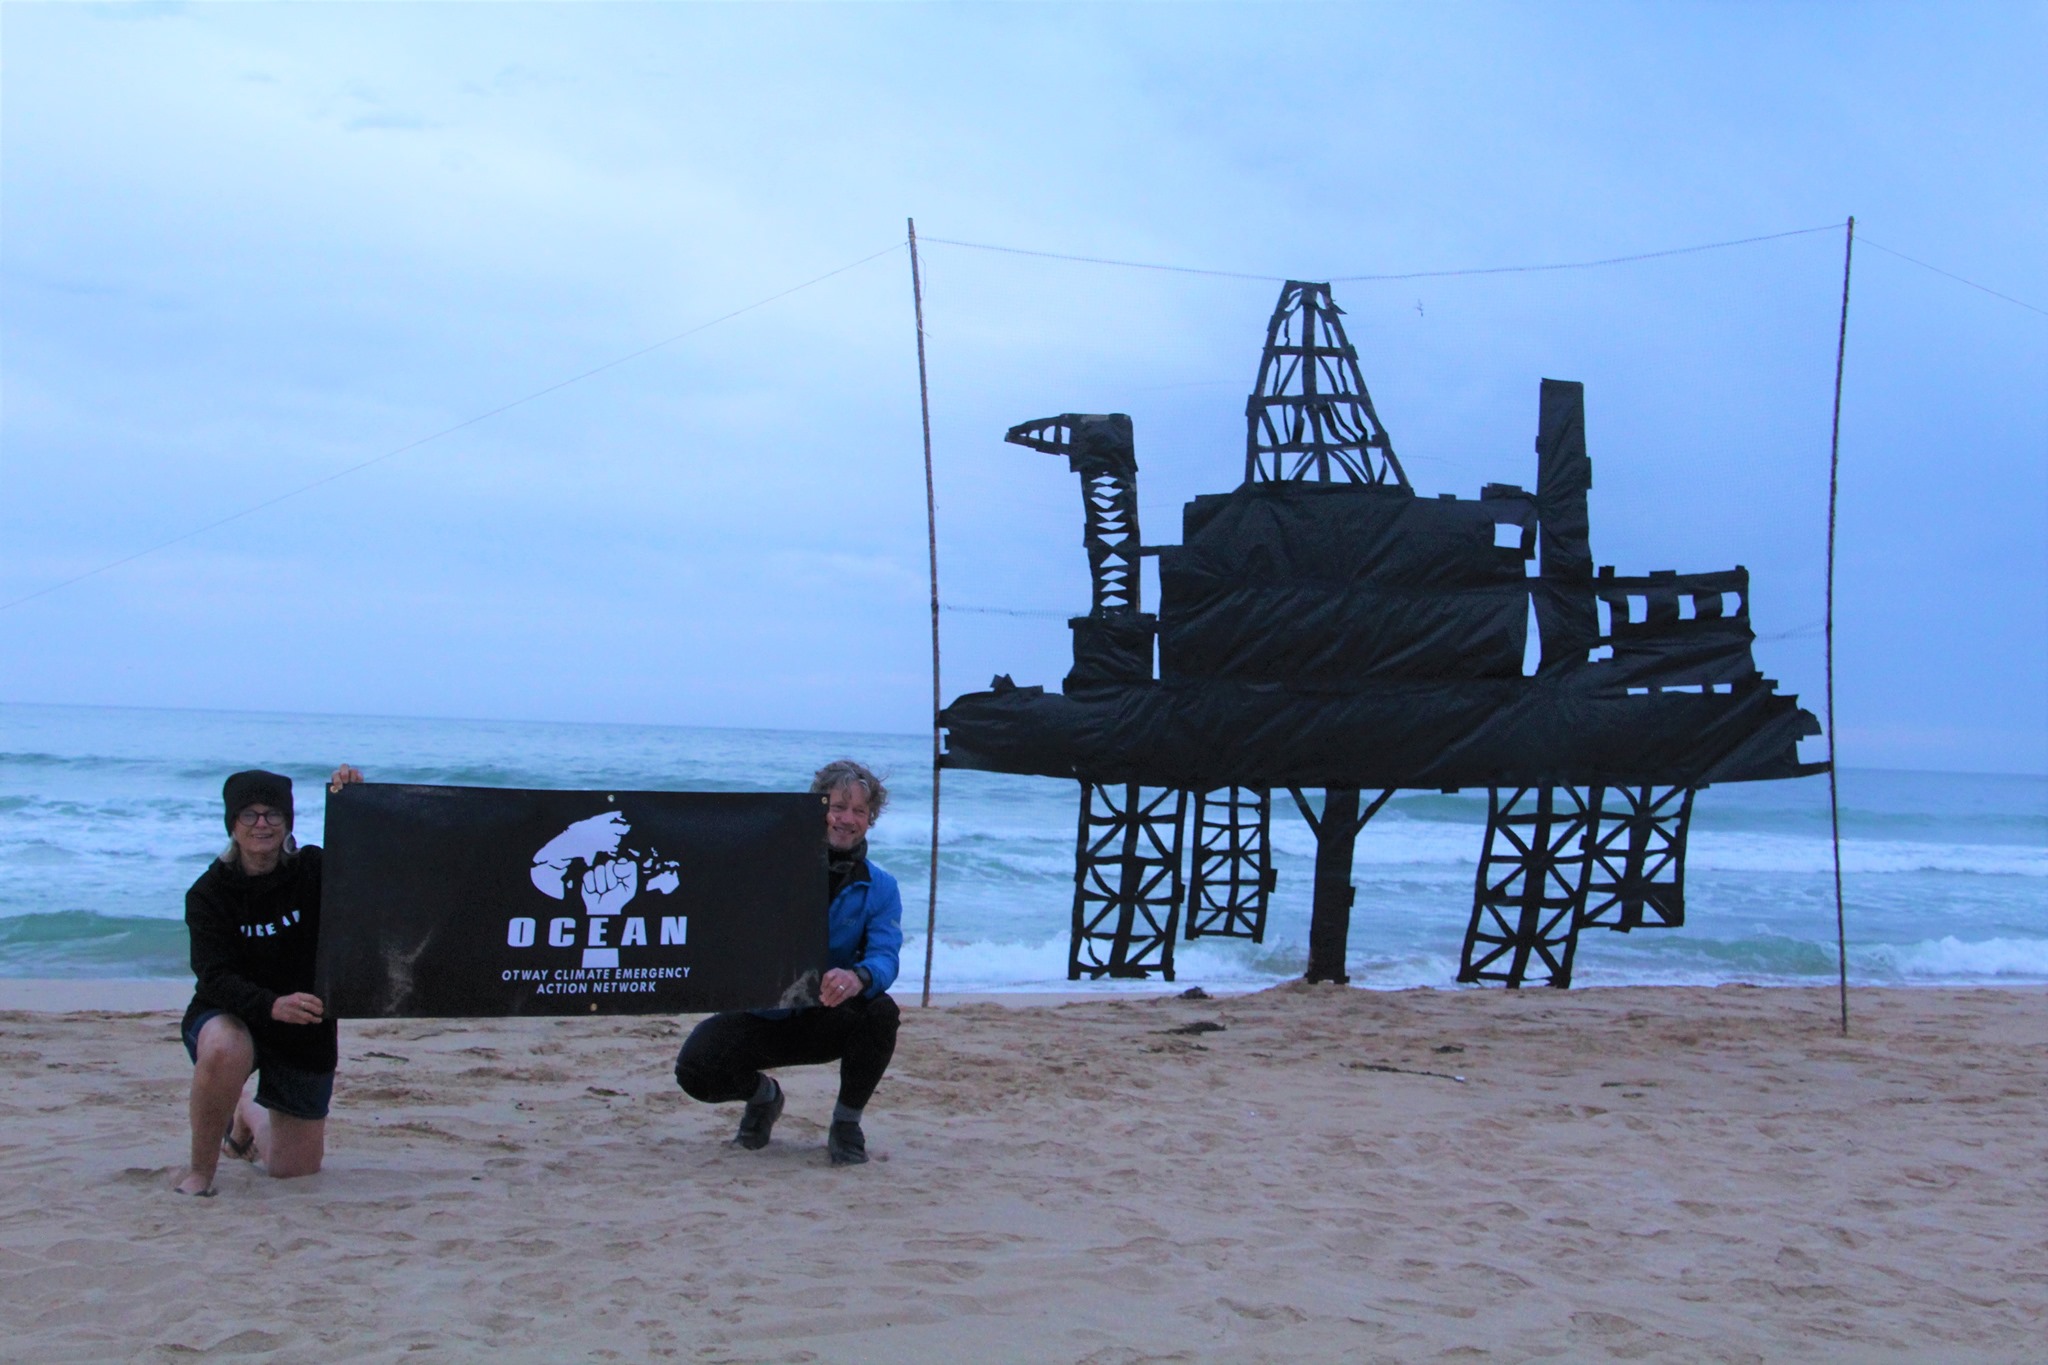 Protest on the beach by OCEAN - black banner with logo and a banner creating the shape of an offshore rig